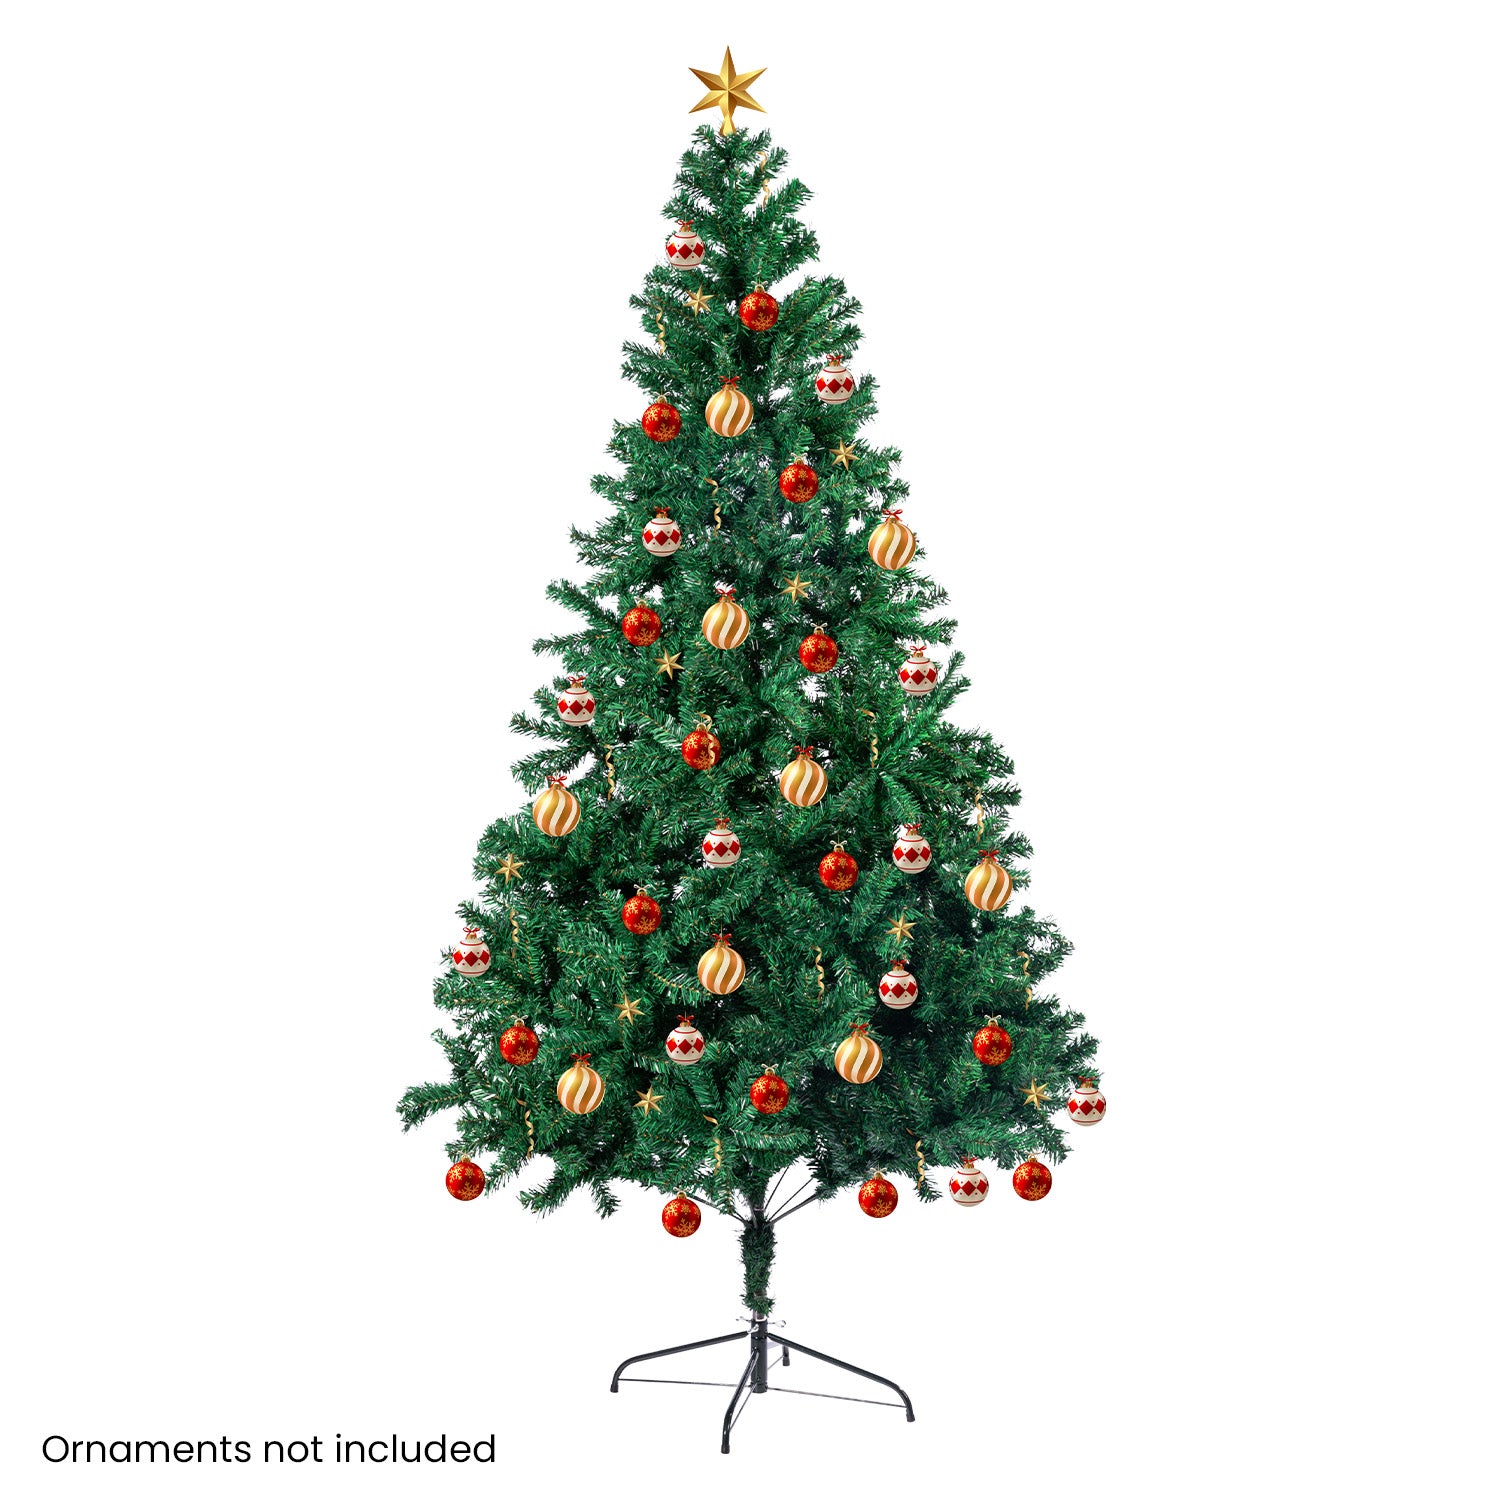 Christabelle Christmas Tree Decor 1.2m Xmas Decorations - 300 Tips Green - 0